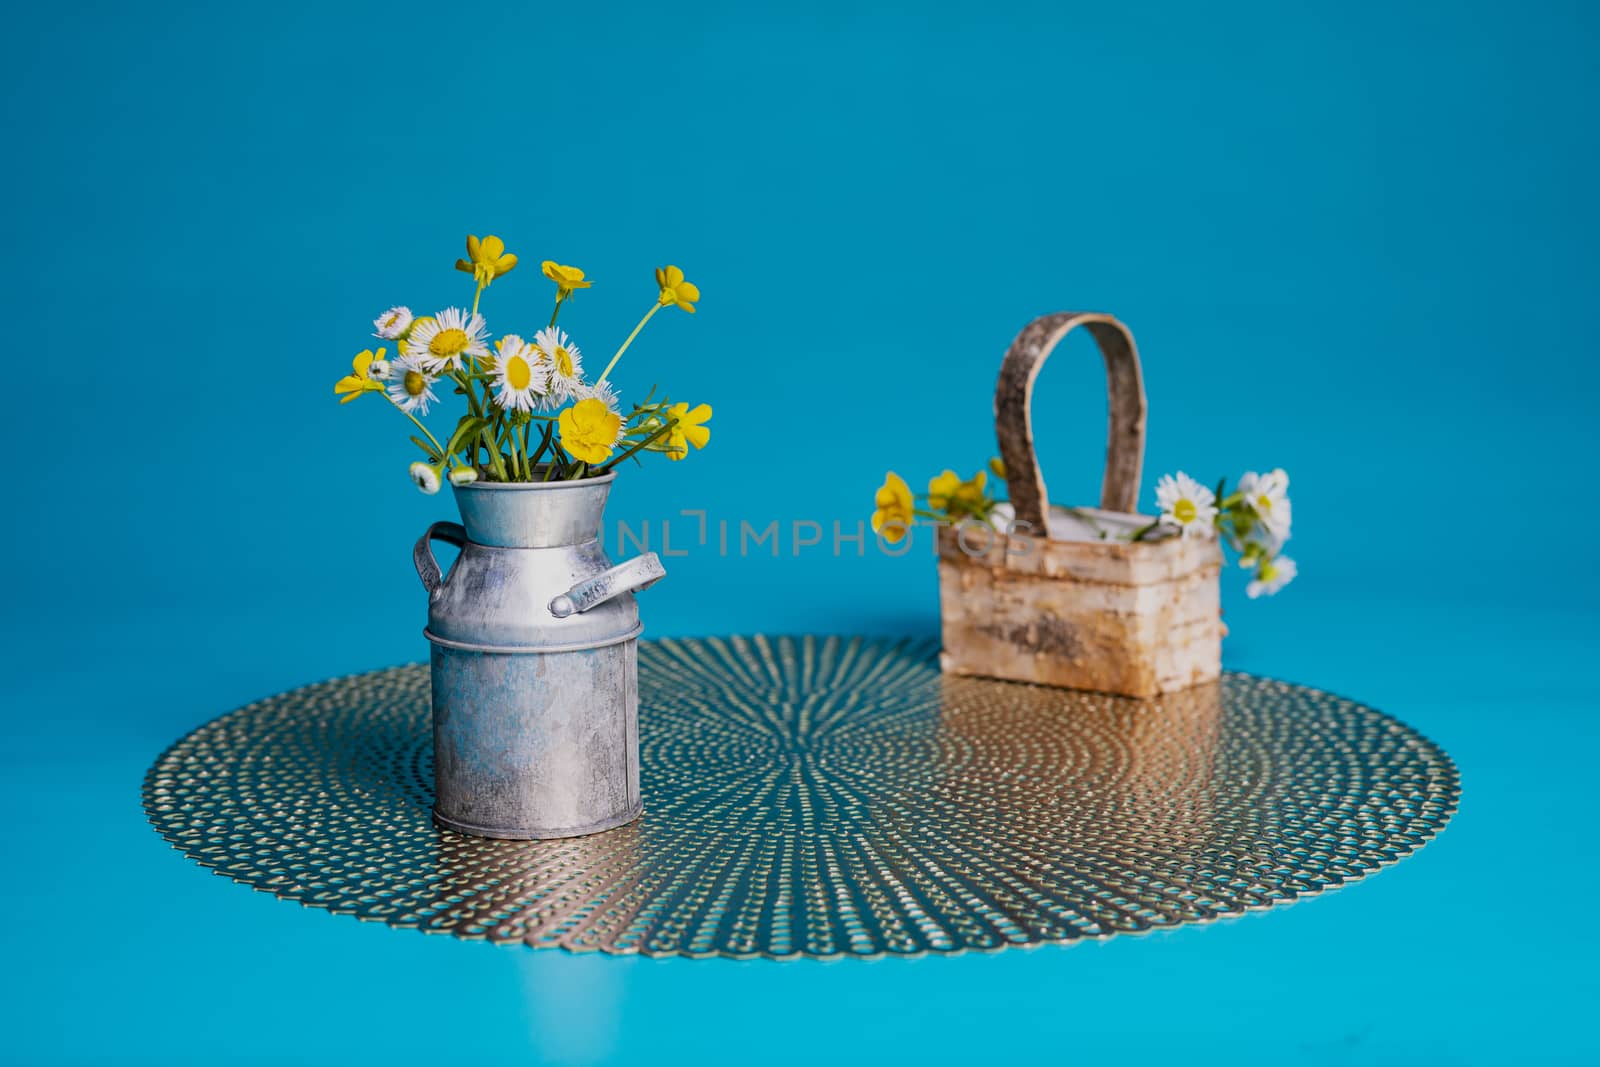 Hairy buttercup and prairie fleabane wildflowers in a miniature milk can and backet. Sitting on a placemat against a teal blue background.